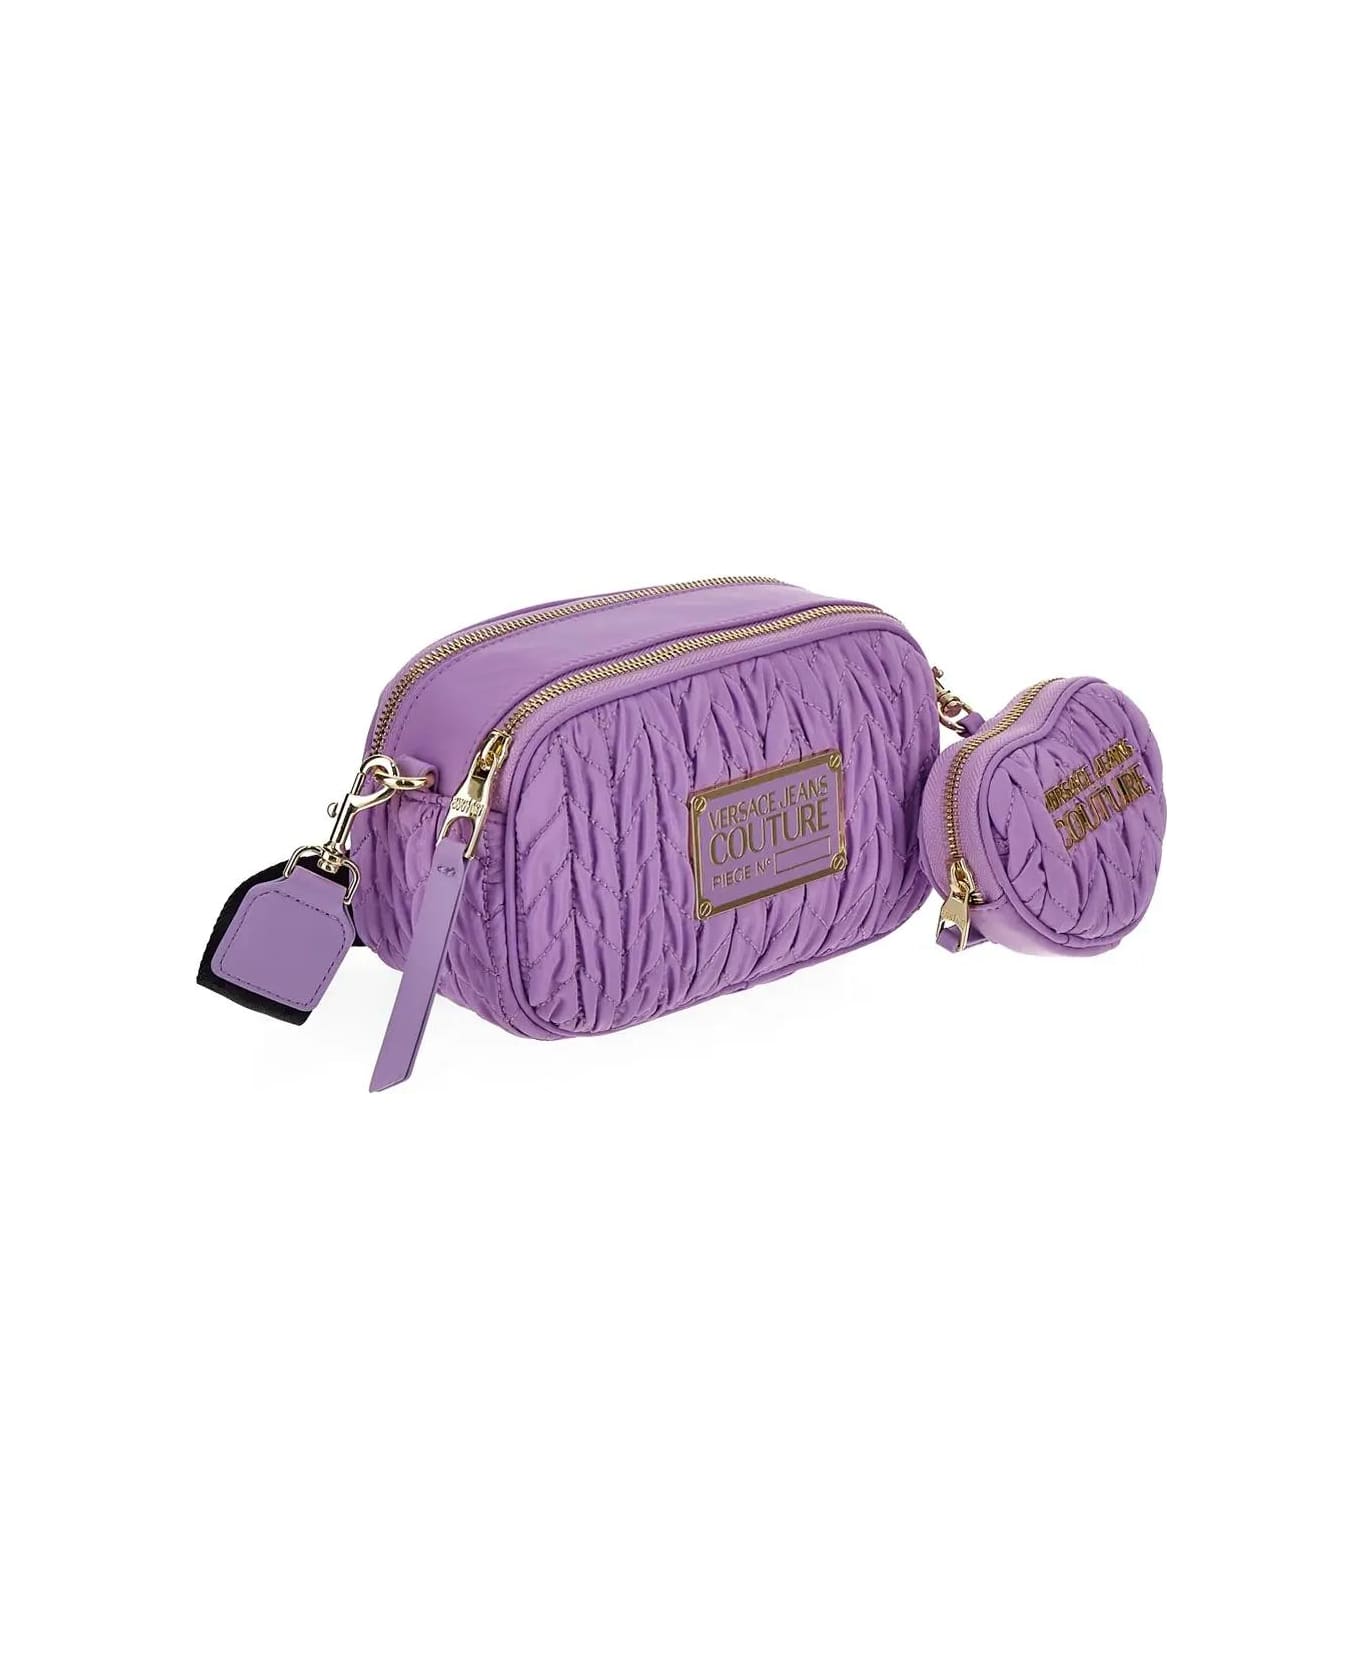 Versace Jeans Couture Bag - PURPLE ショルダーバッグ